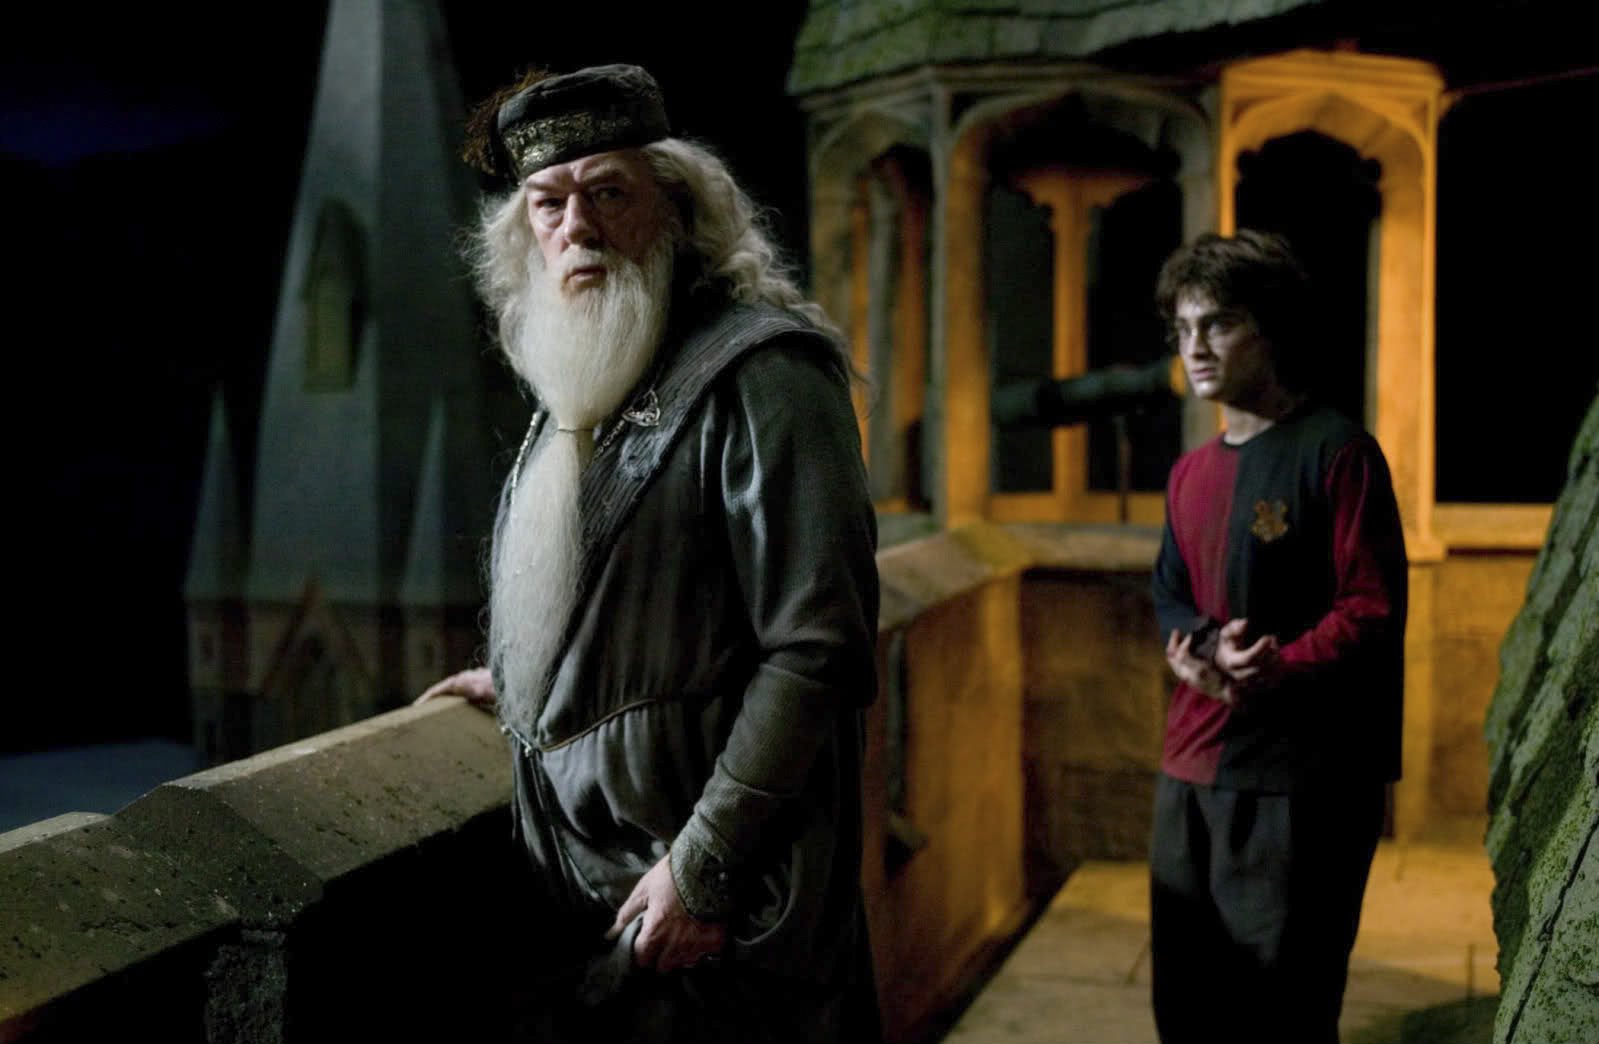 Harry Potter's Albus Dumbledore, played by Michael Gambon, was rated the most loved fictional teacher.